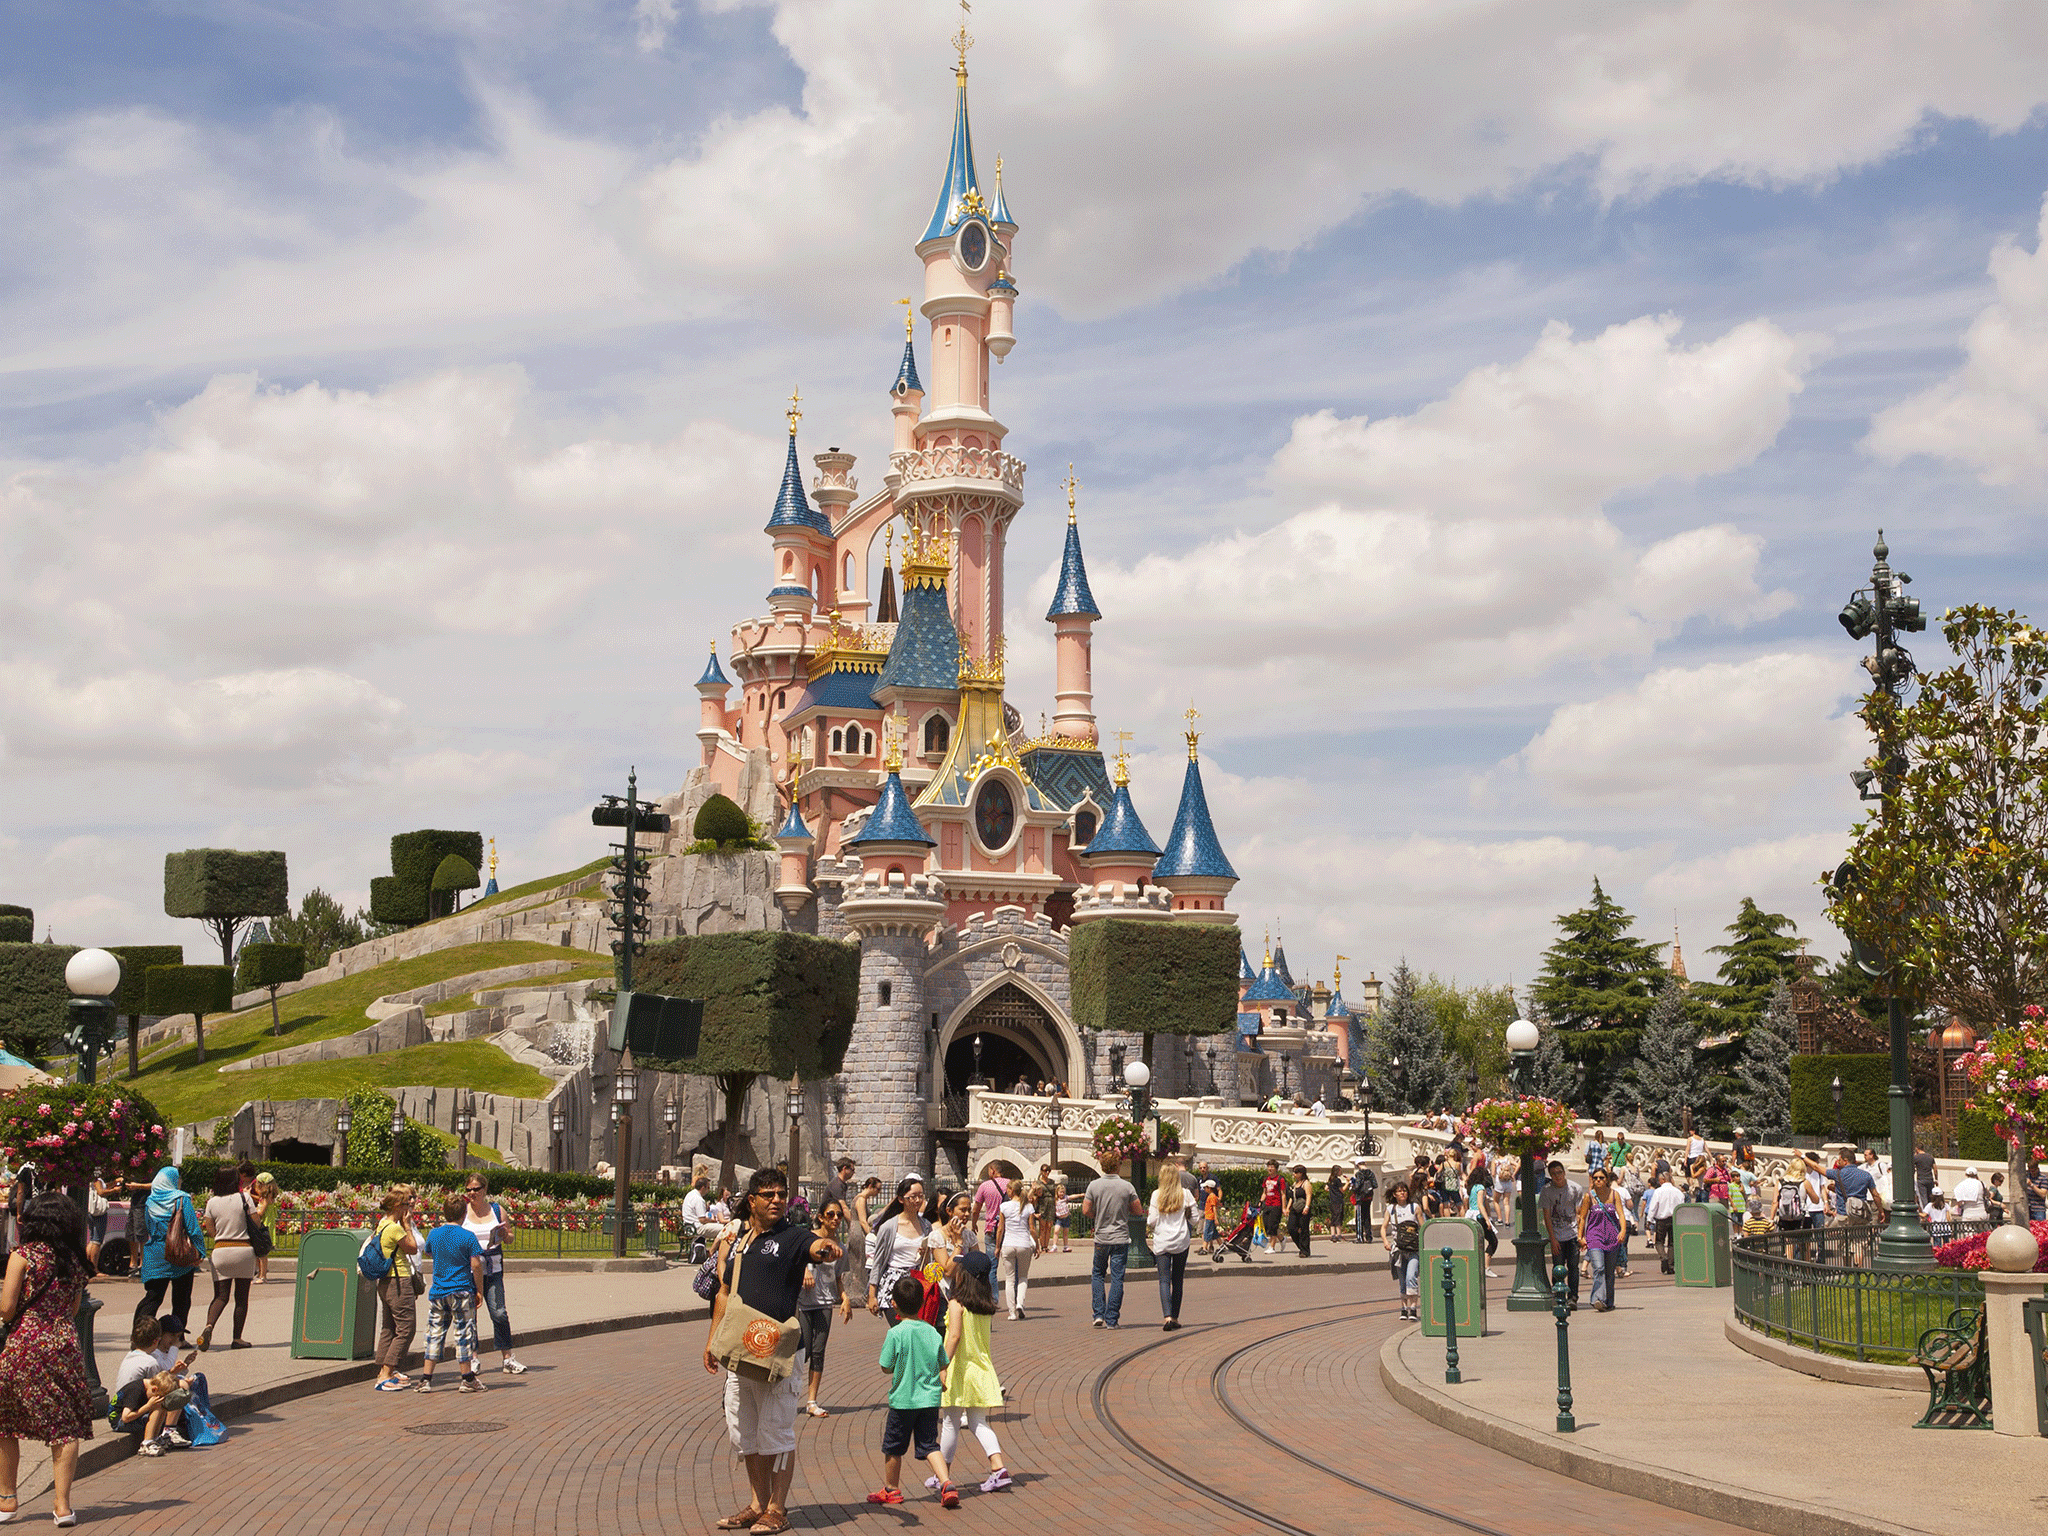 There have been several high-profile incidents at Disneyland Paris over the past few years have raised concerns